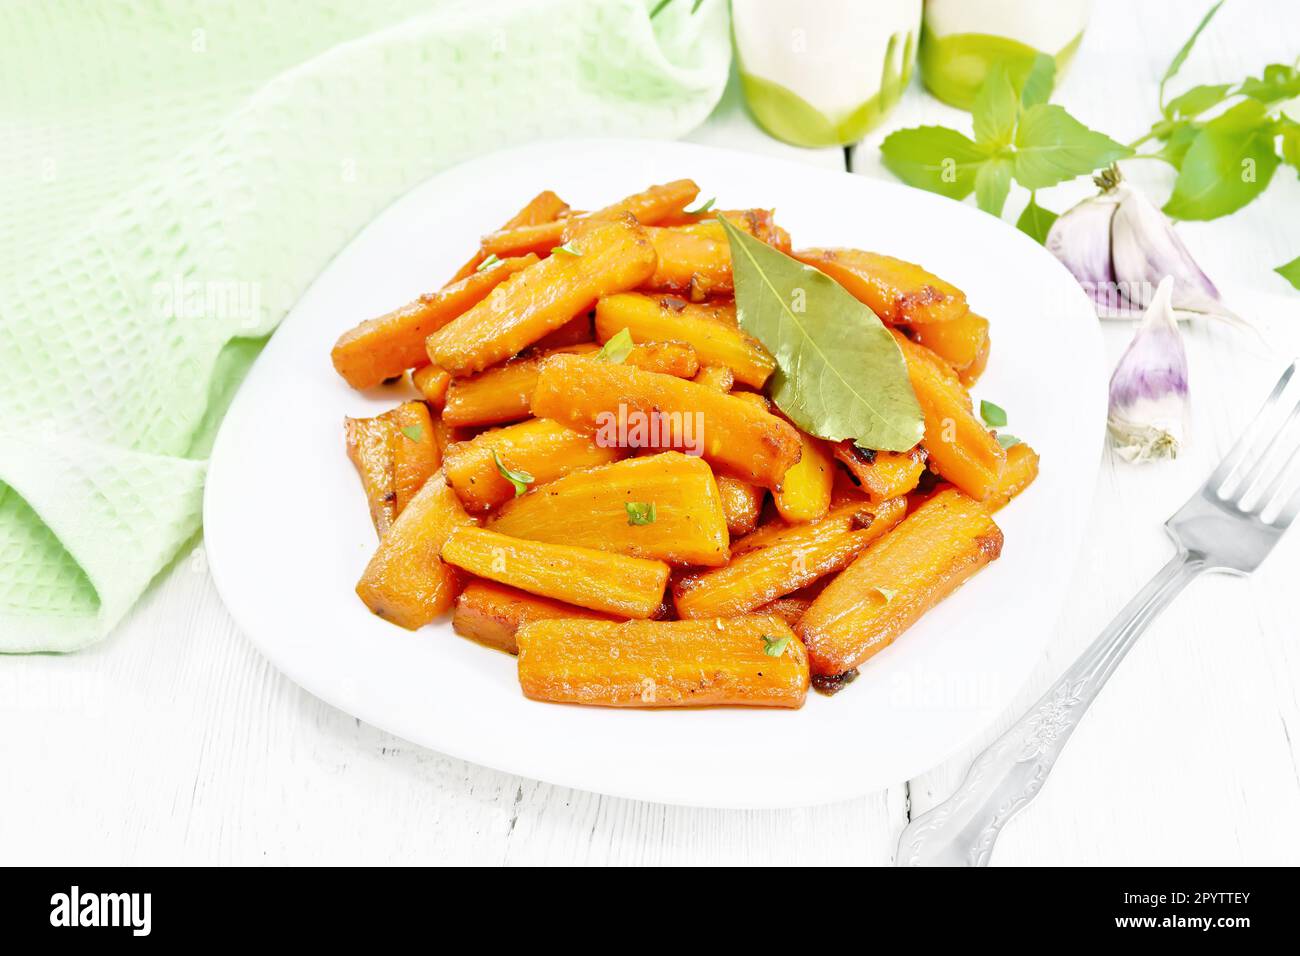 Carrots fried with garlic, bay leaf, spices and green onions in a plate, basil and napkin on white wooden board background Stock Photo